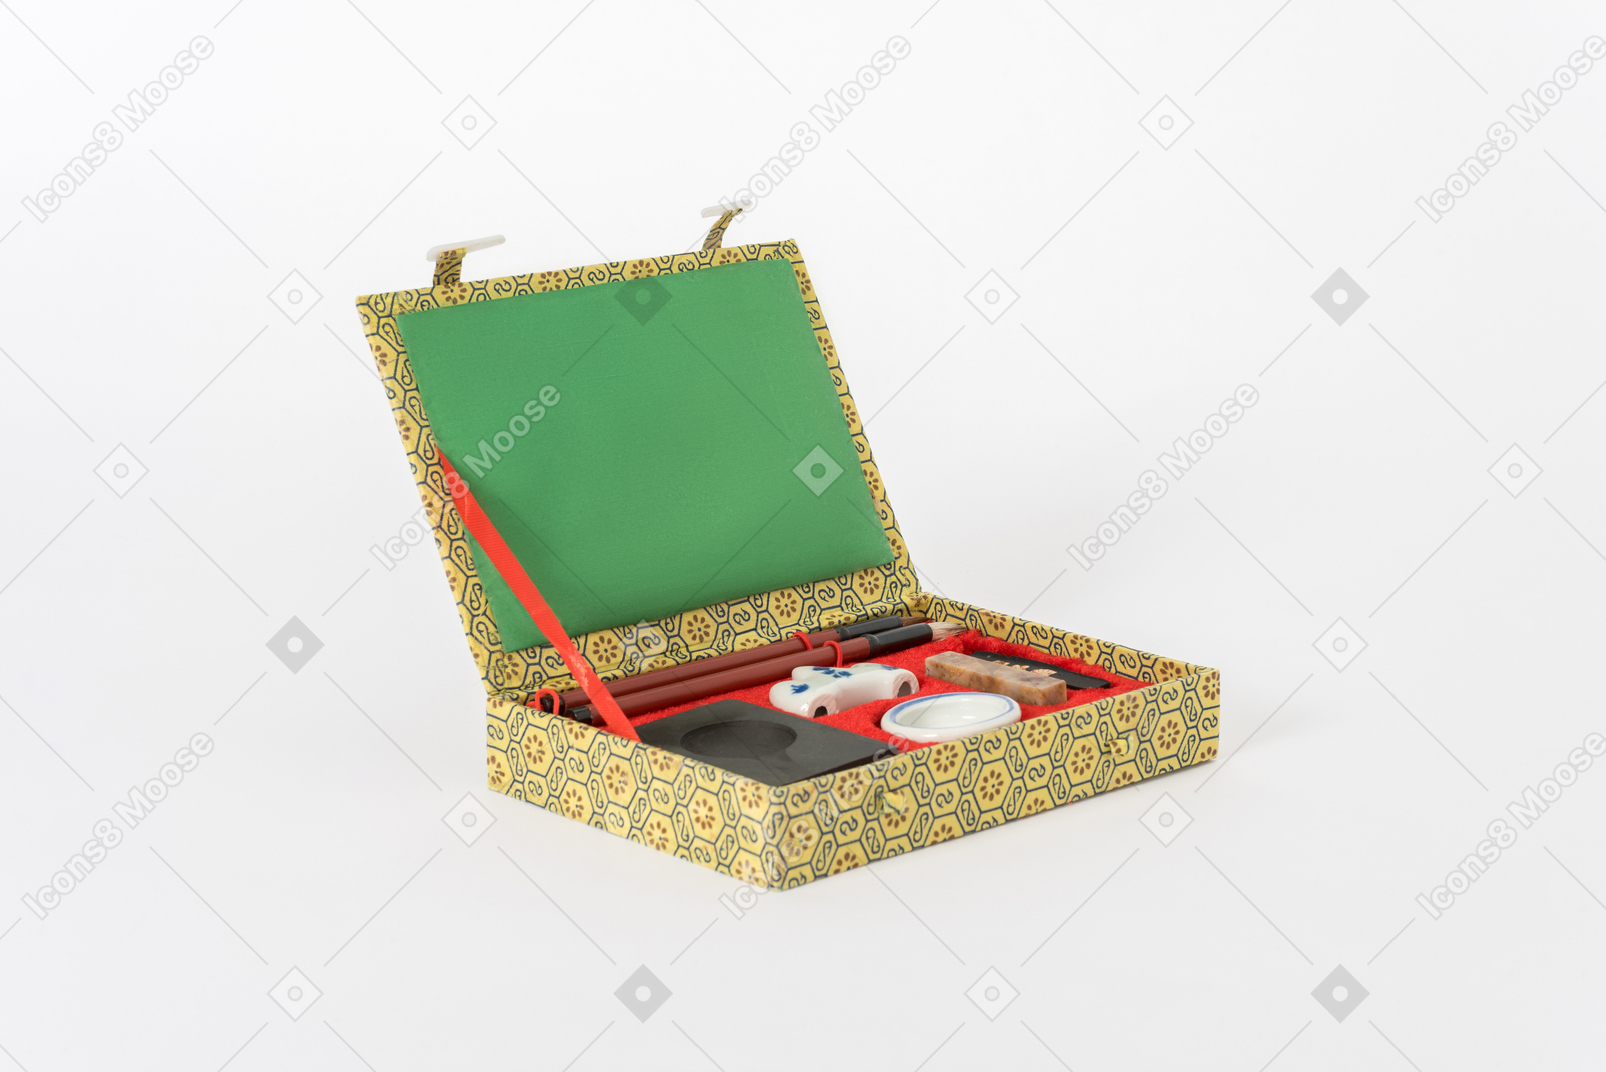 Colourful box with items in it on white background